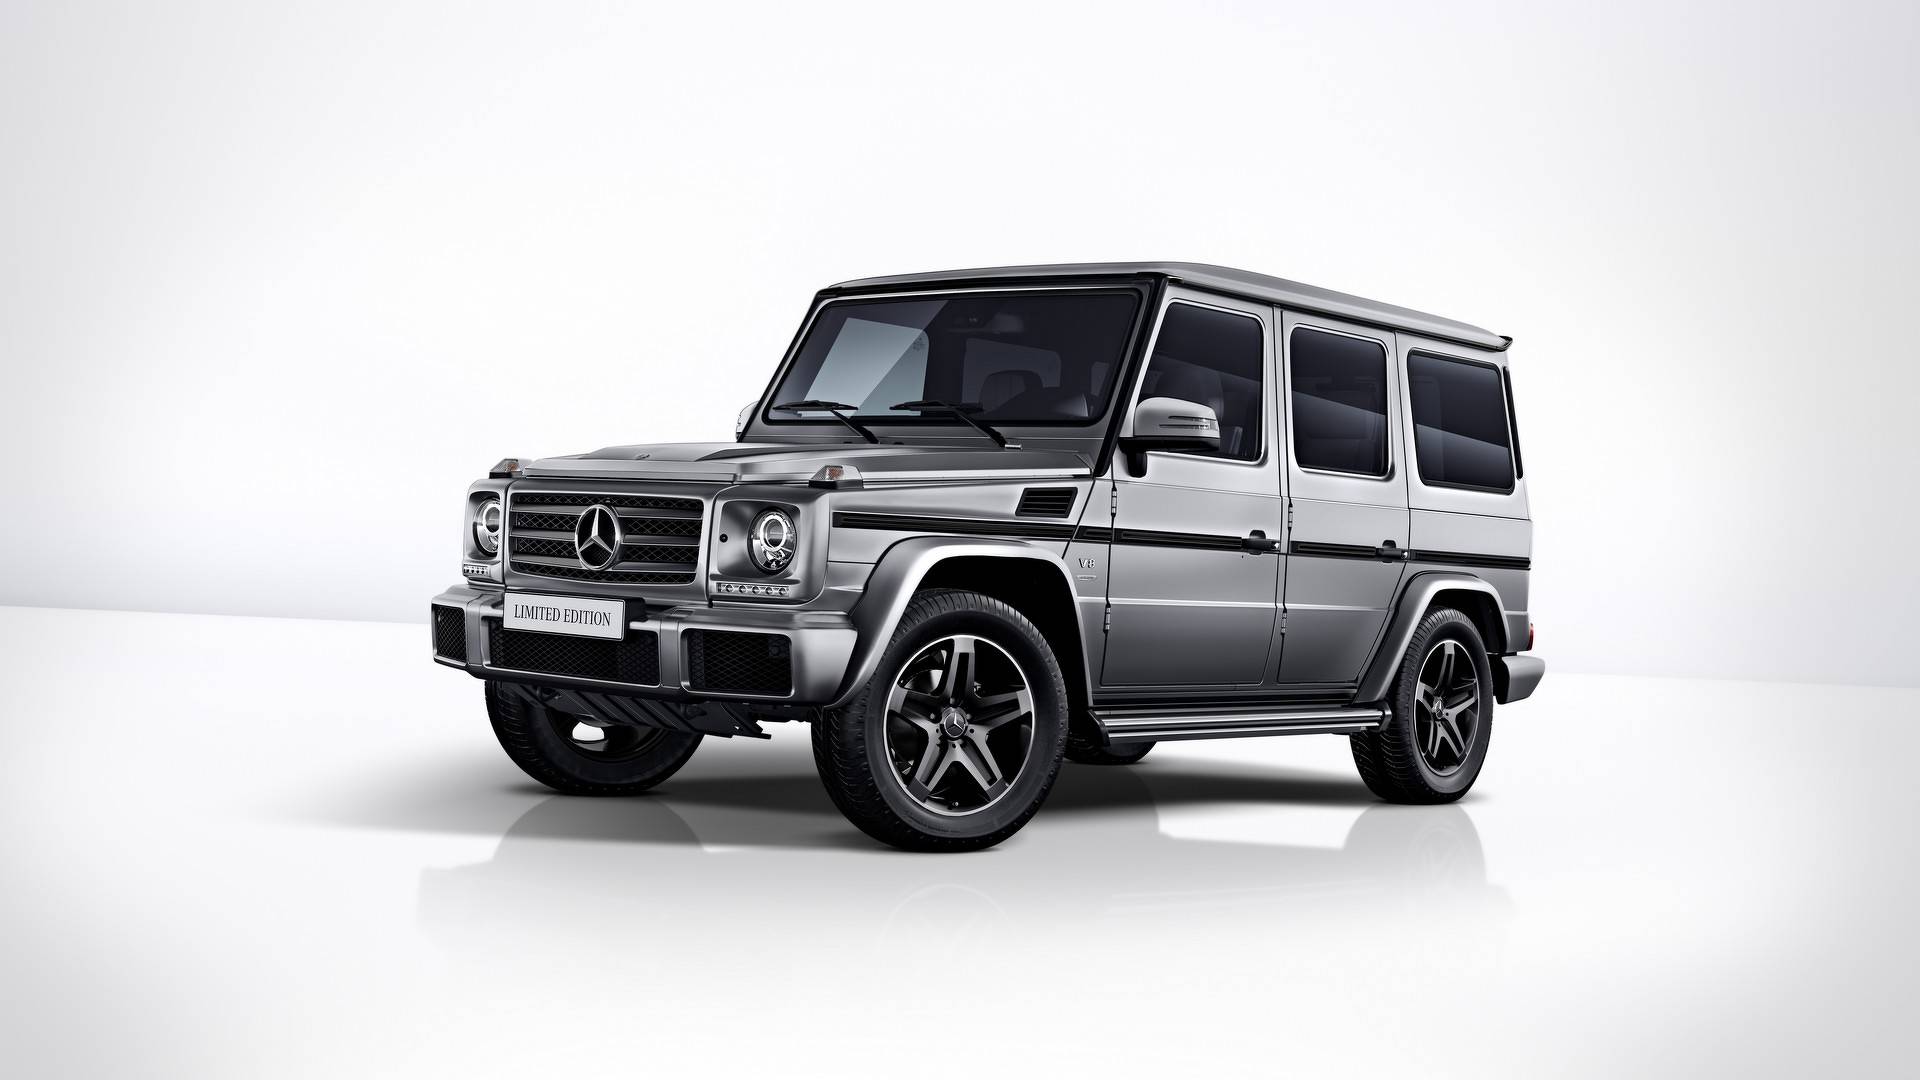 Mercedes G-Class Limited Edition: Αποχαιρετισμός στα όπλα